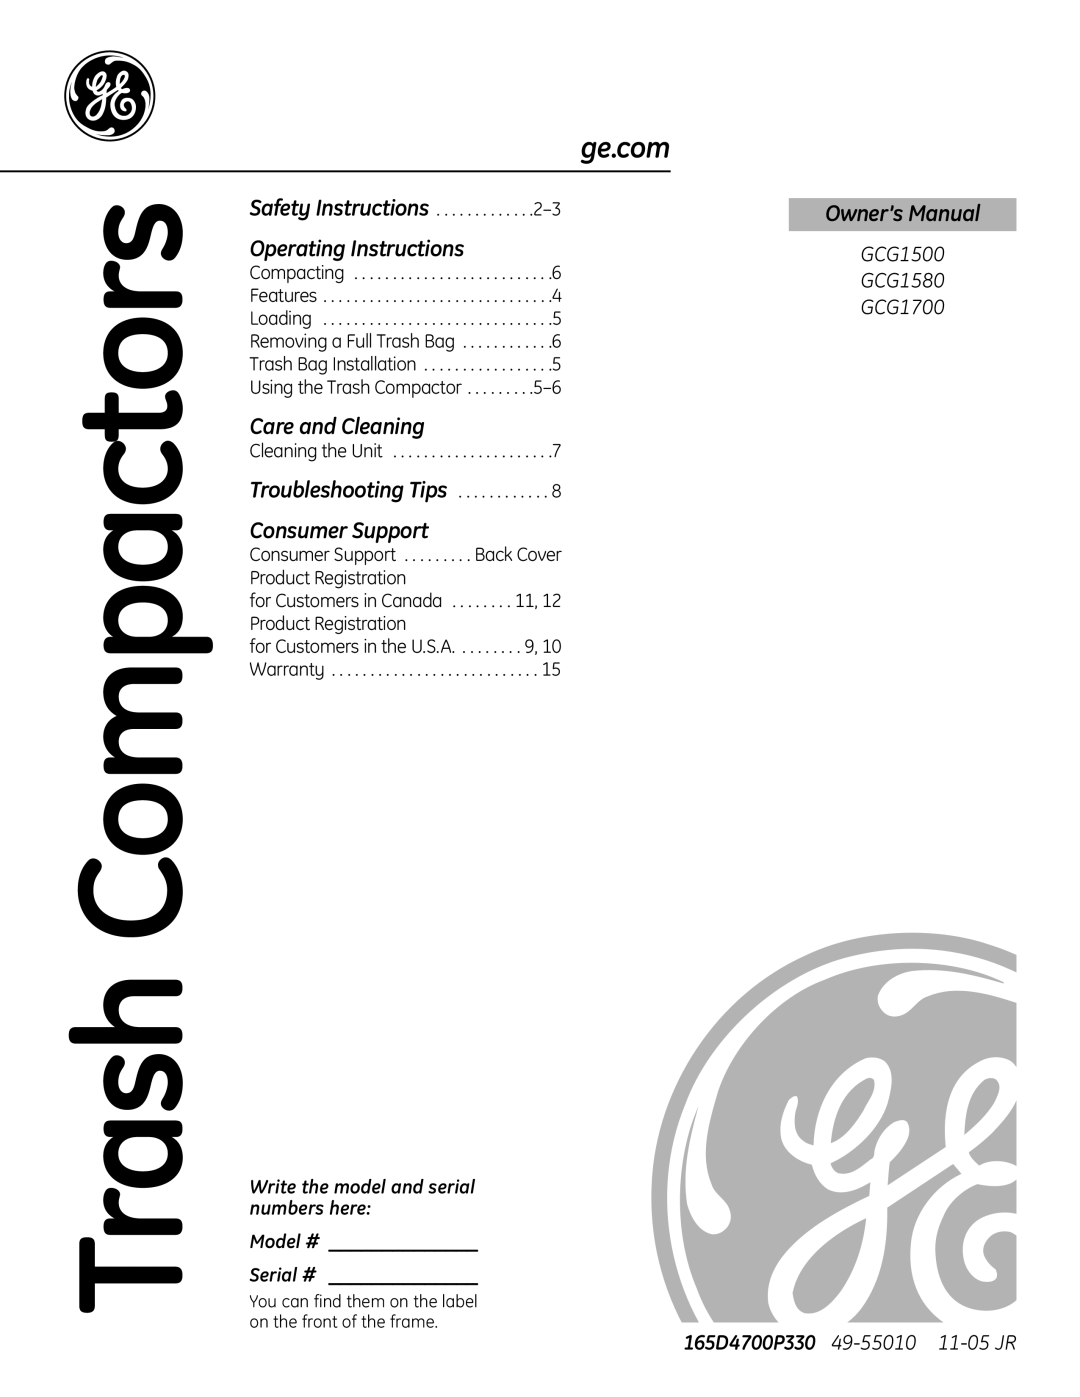 GE GCG1500, GCG1700, GCG1580 owner manual Operating Instructions, Care and Cleaning, Consumer Support, Trash Compactors 